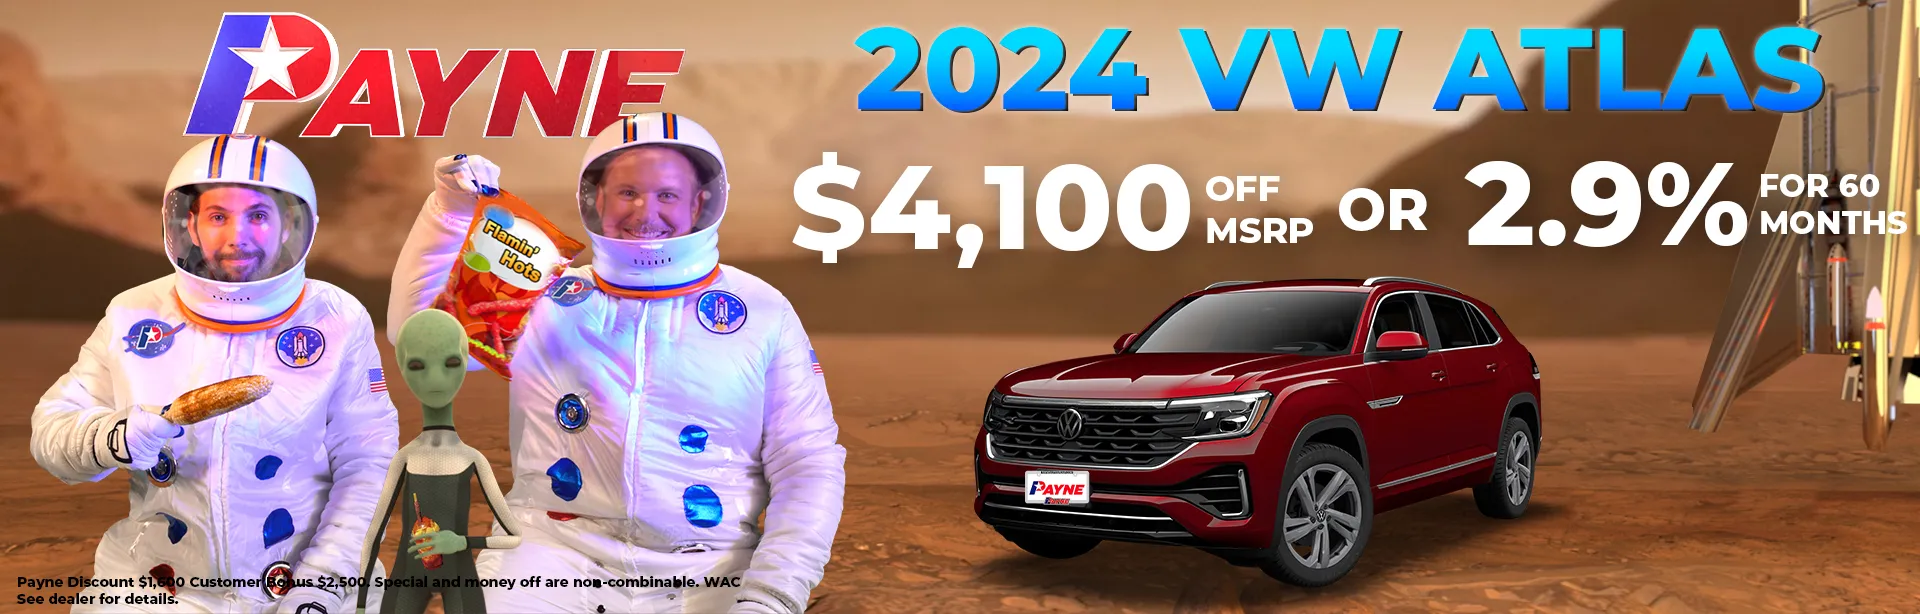 Get $4,100 off MSRP or 2.9% for 60 Months on a 2024 VW Atlas